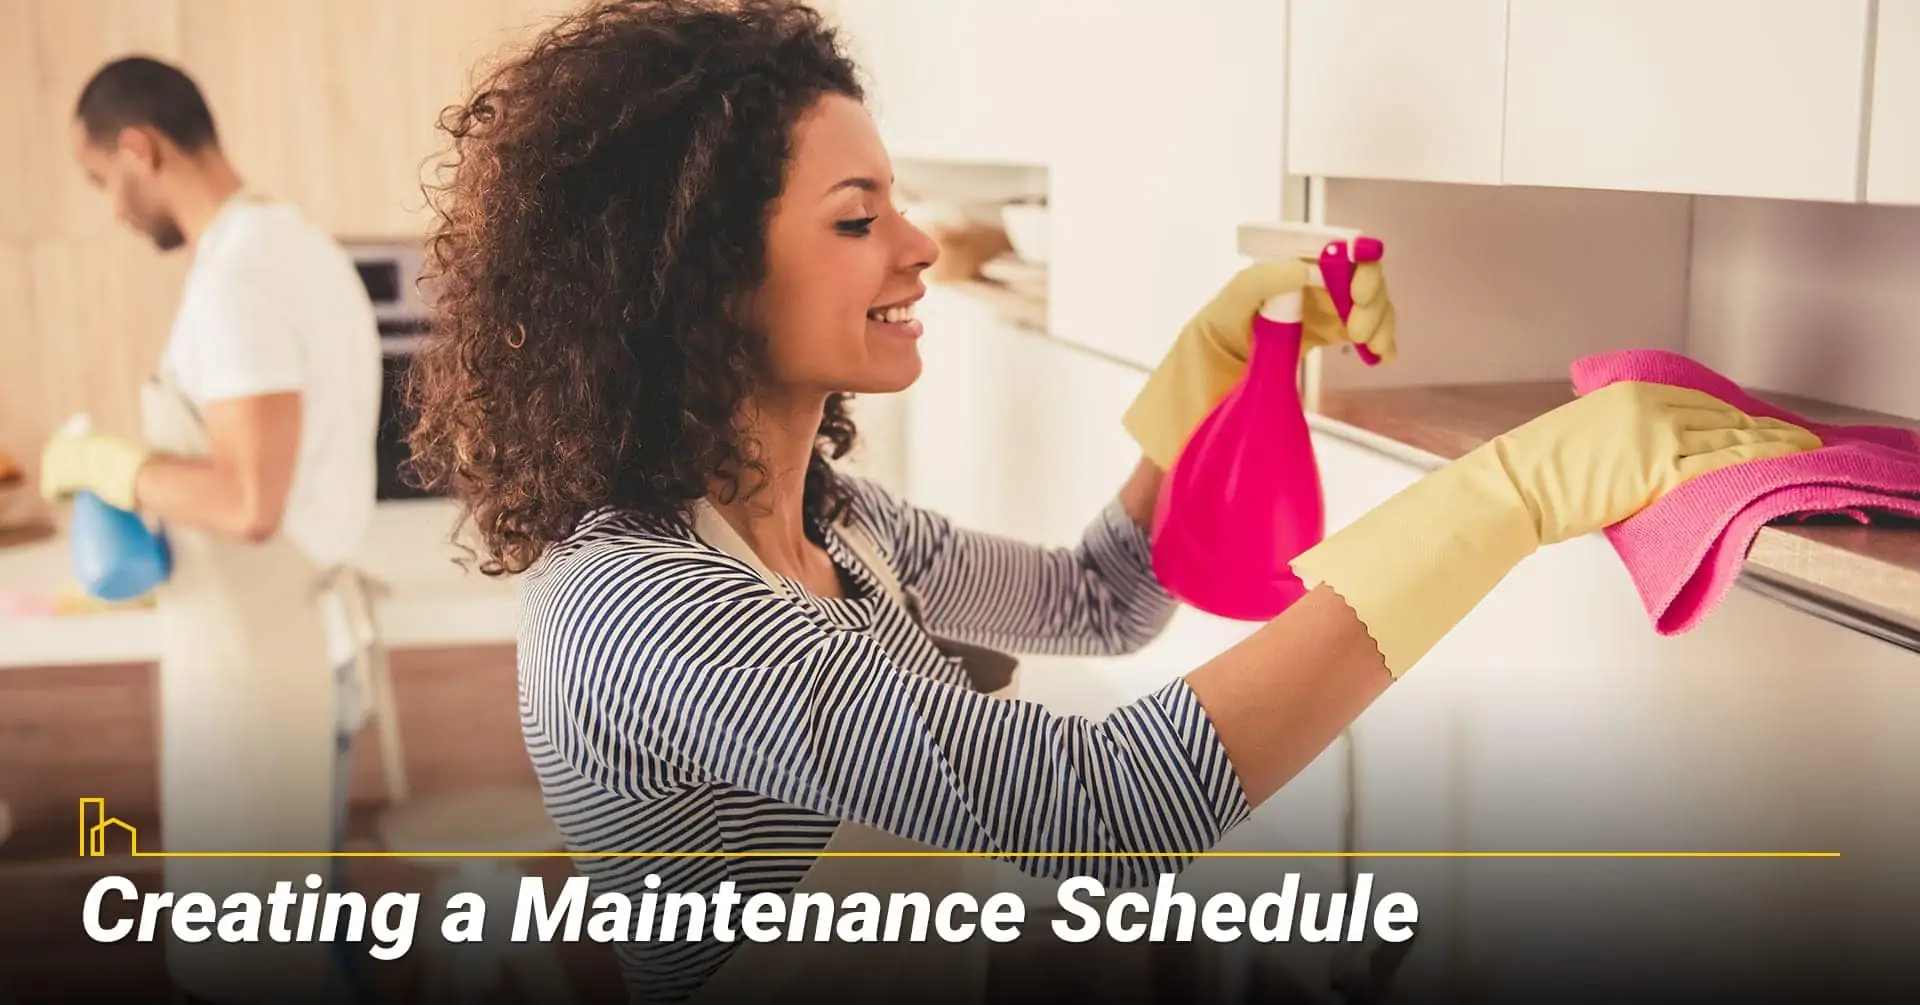 Creating a Maintenance Schedule, regularly maintain your home